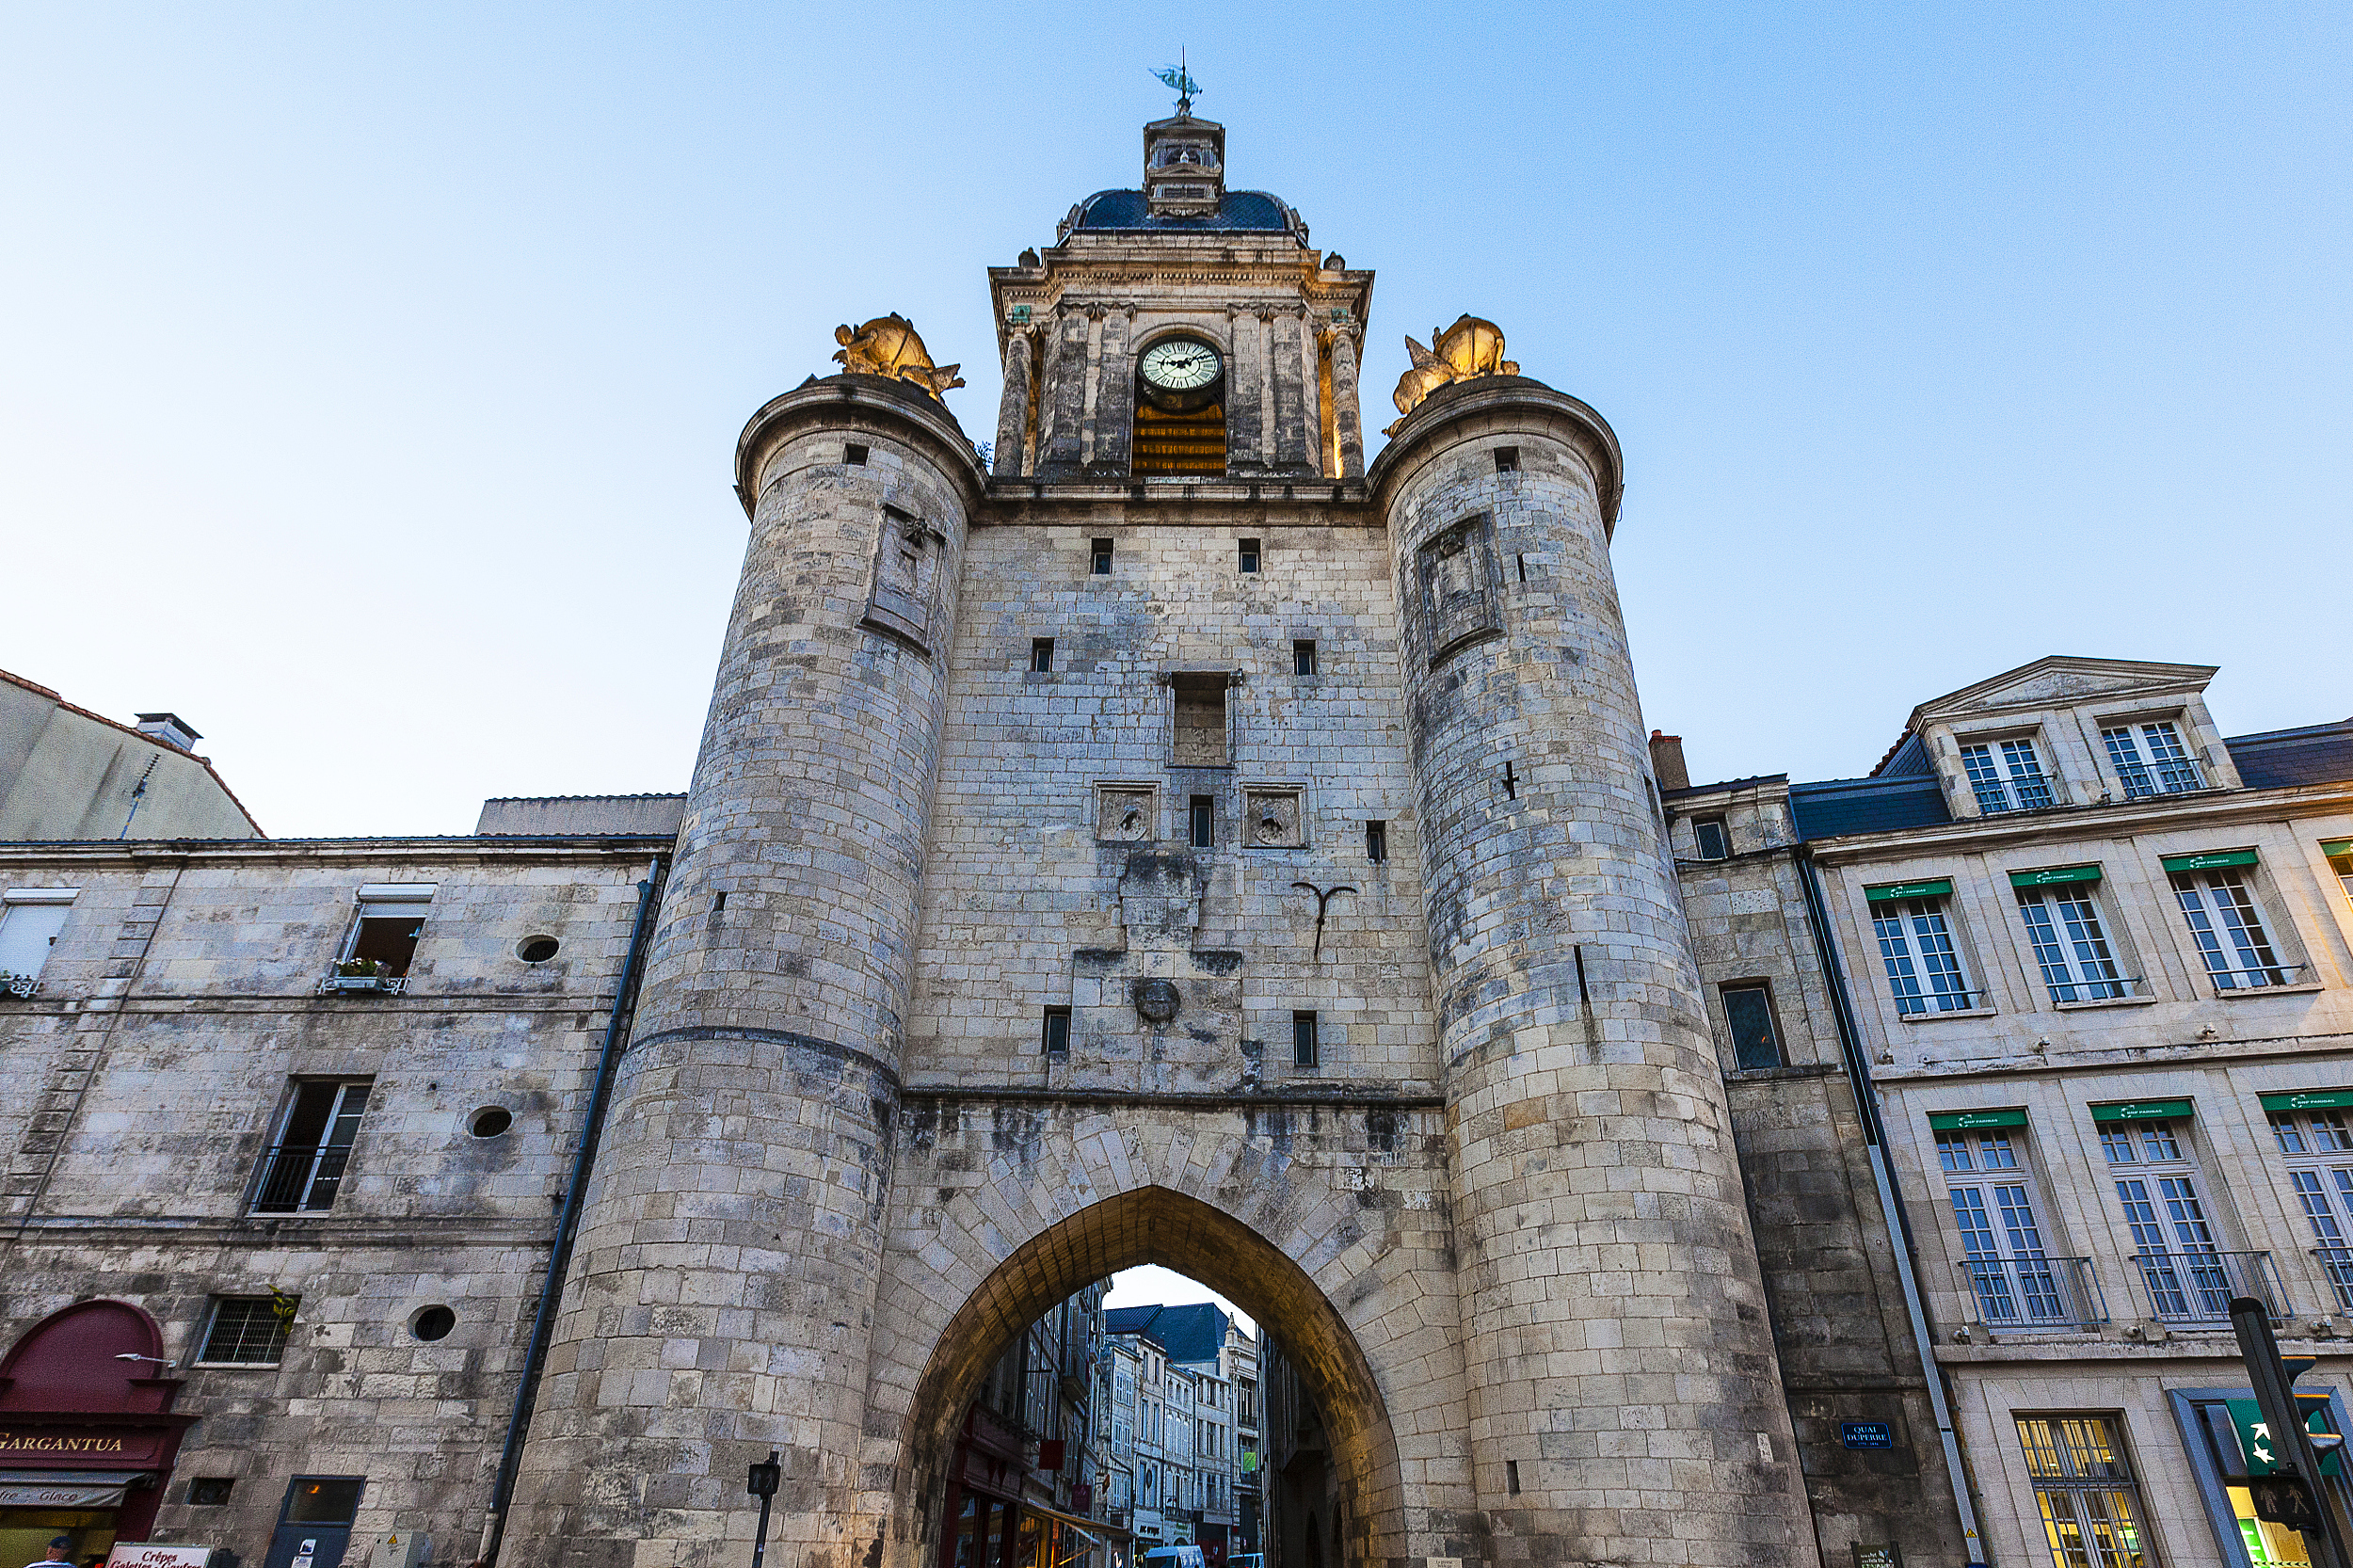 Latest travel itineraries for Porte de la Grosse-Horloge in November  (updated in 2023), Porte de la Grosse-Horloge reviews, Porte de la Grosse- Horloge address and opening hours, popular attractions, hotels, and  restaurants near